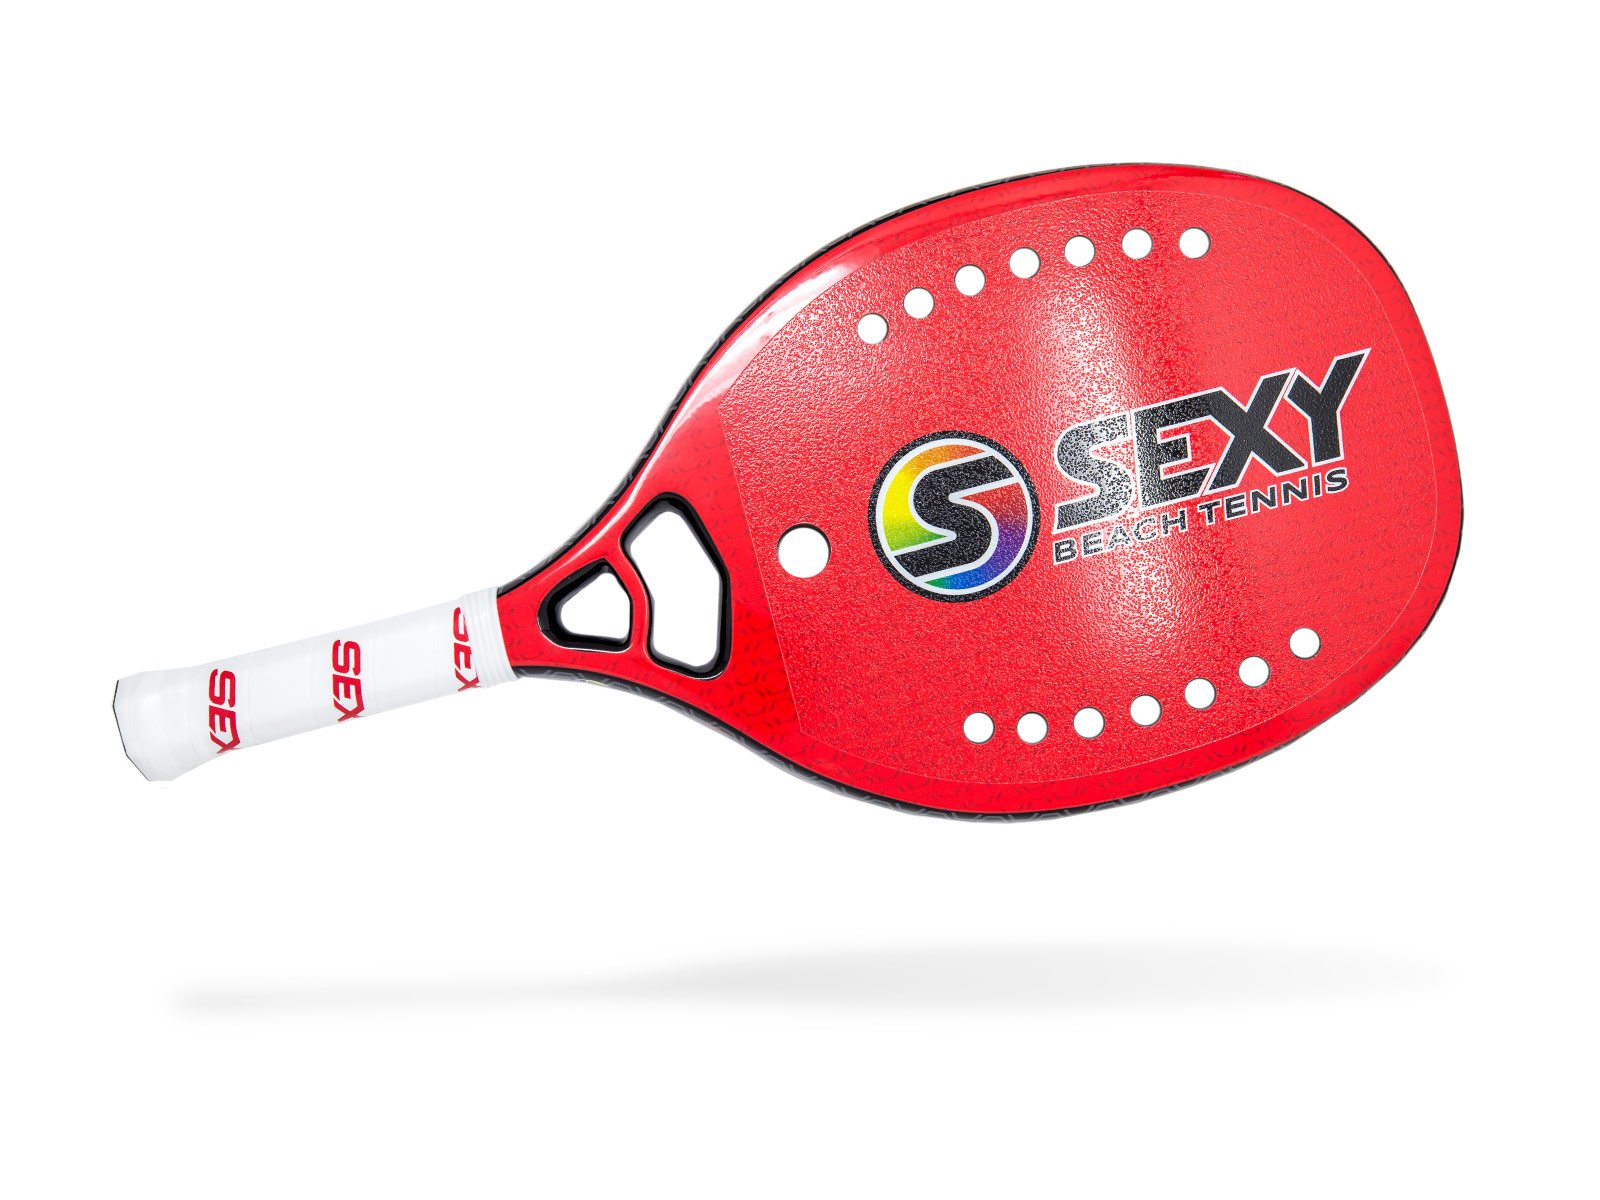 Sexy Brand Red Hex Beach Tennis Paddle